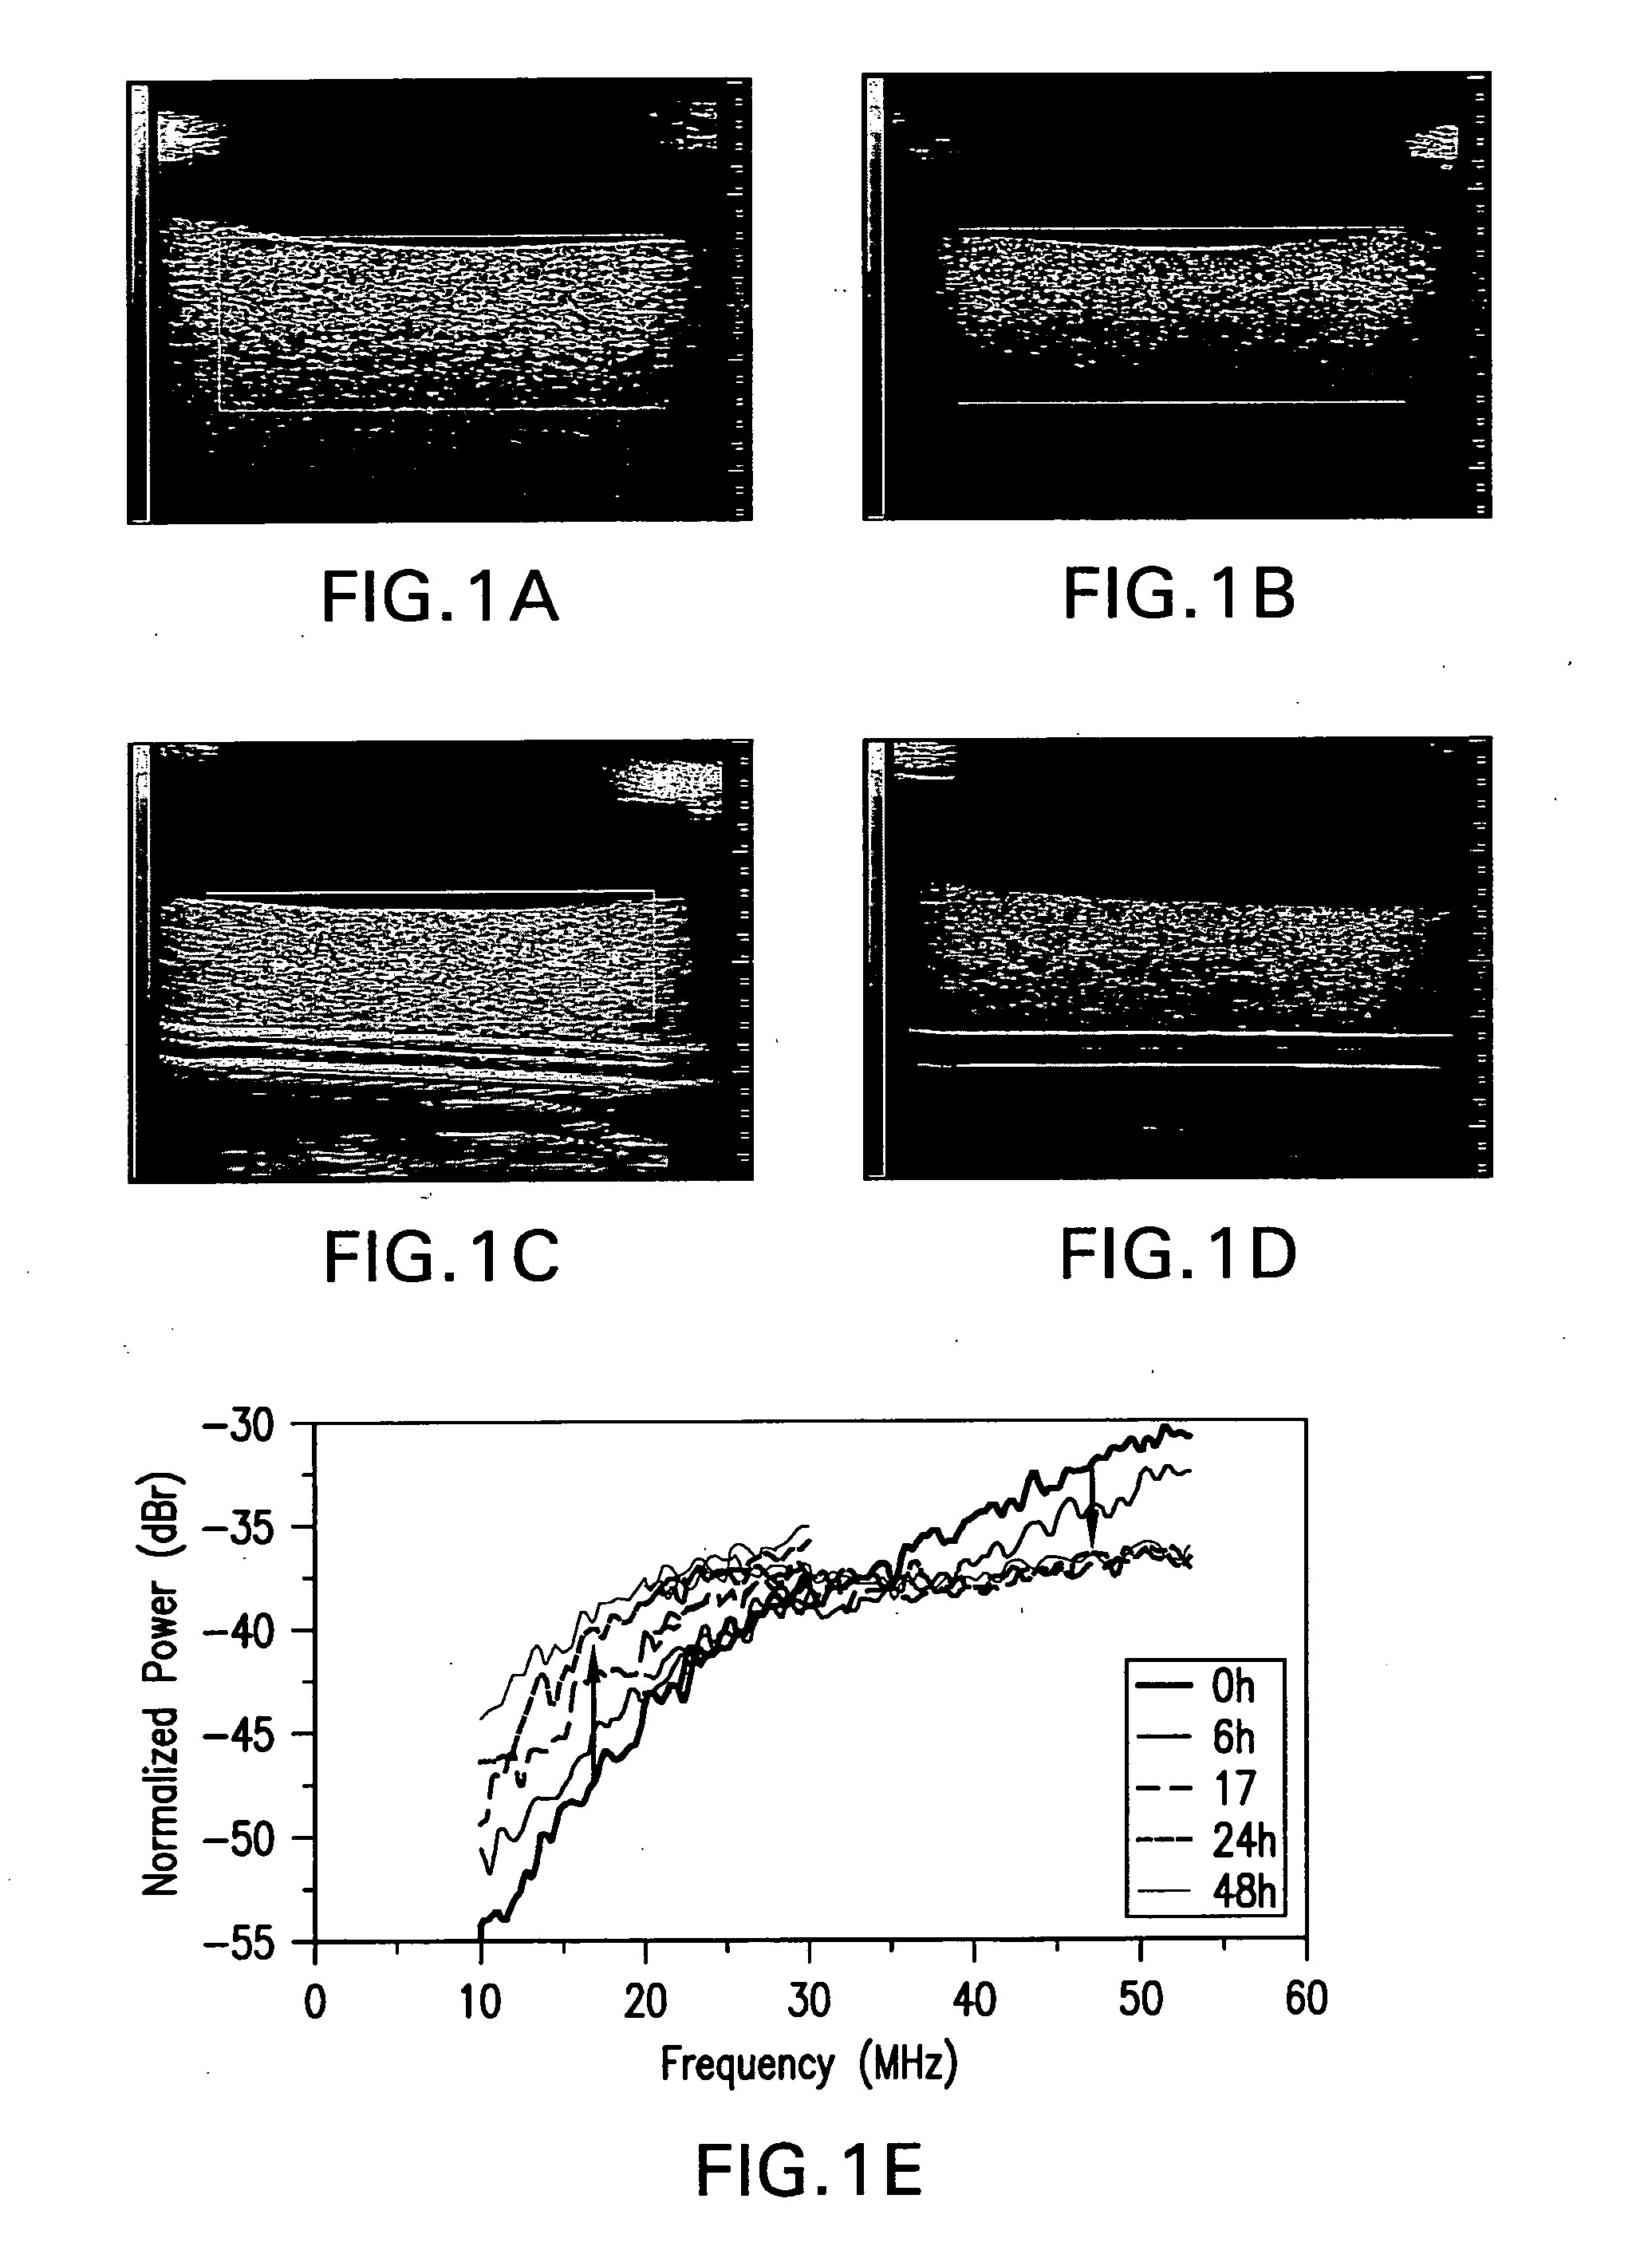 Methods of monitoring cellular death using low frequency ultrasound